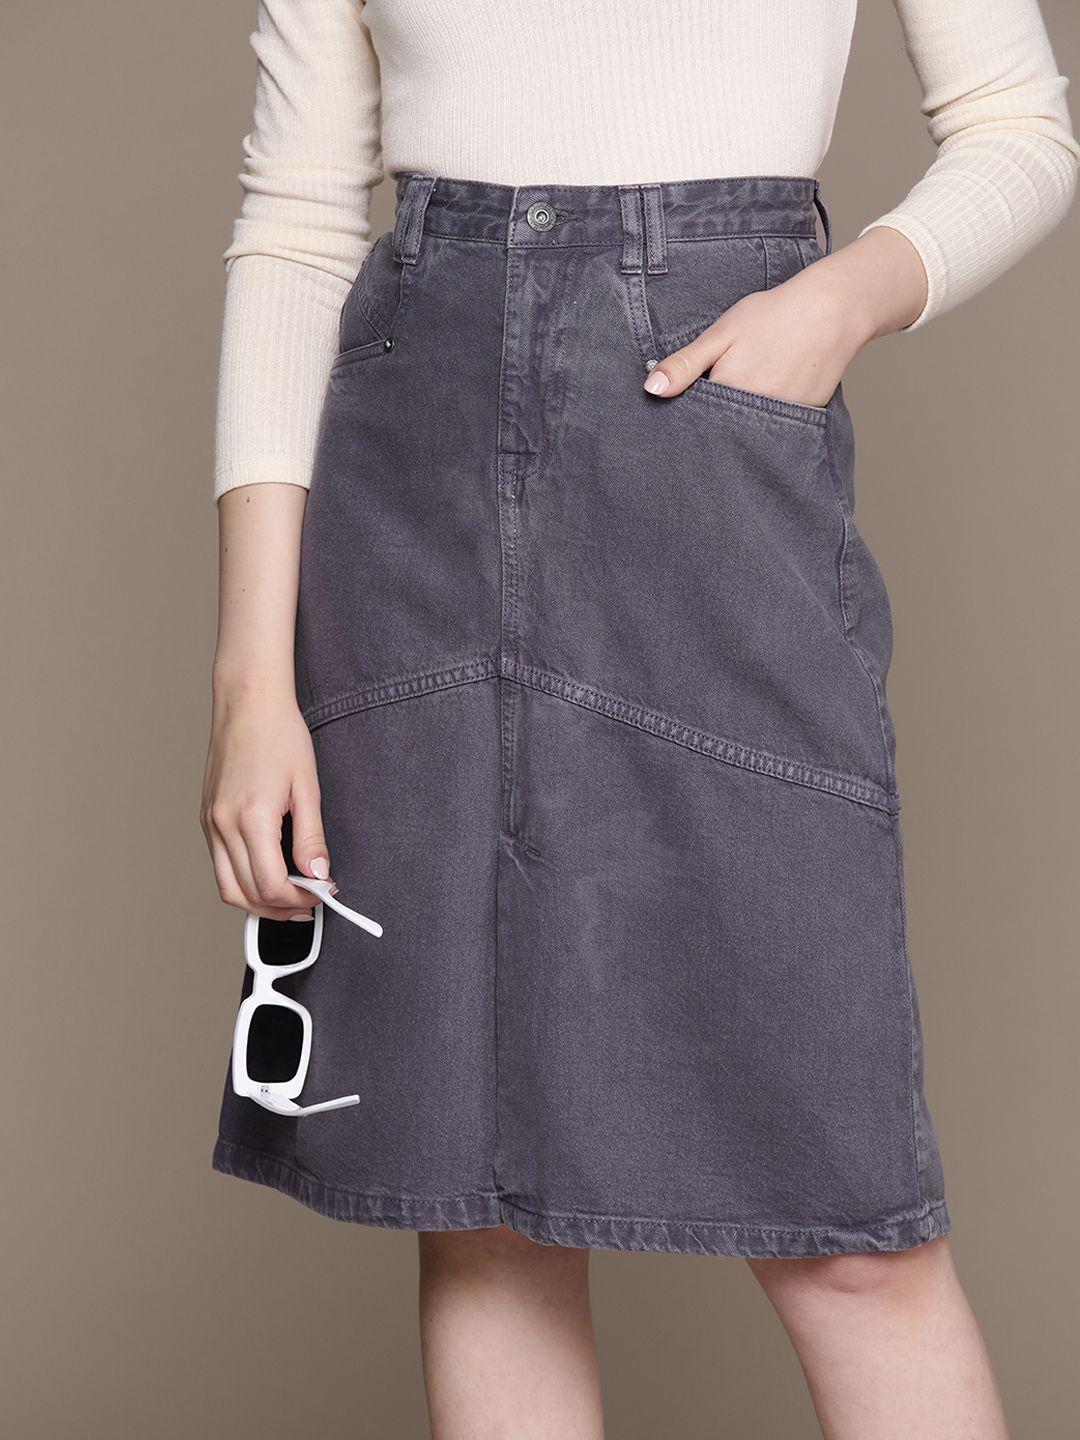 the roadster lifestyle co. women straight pure cotton denim skirt